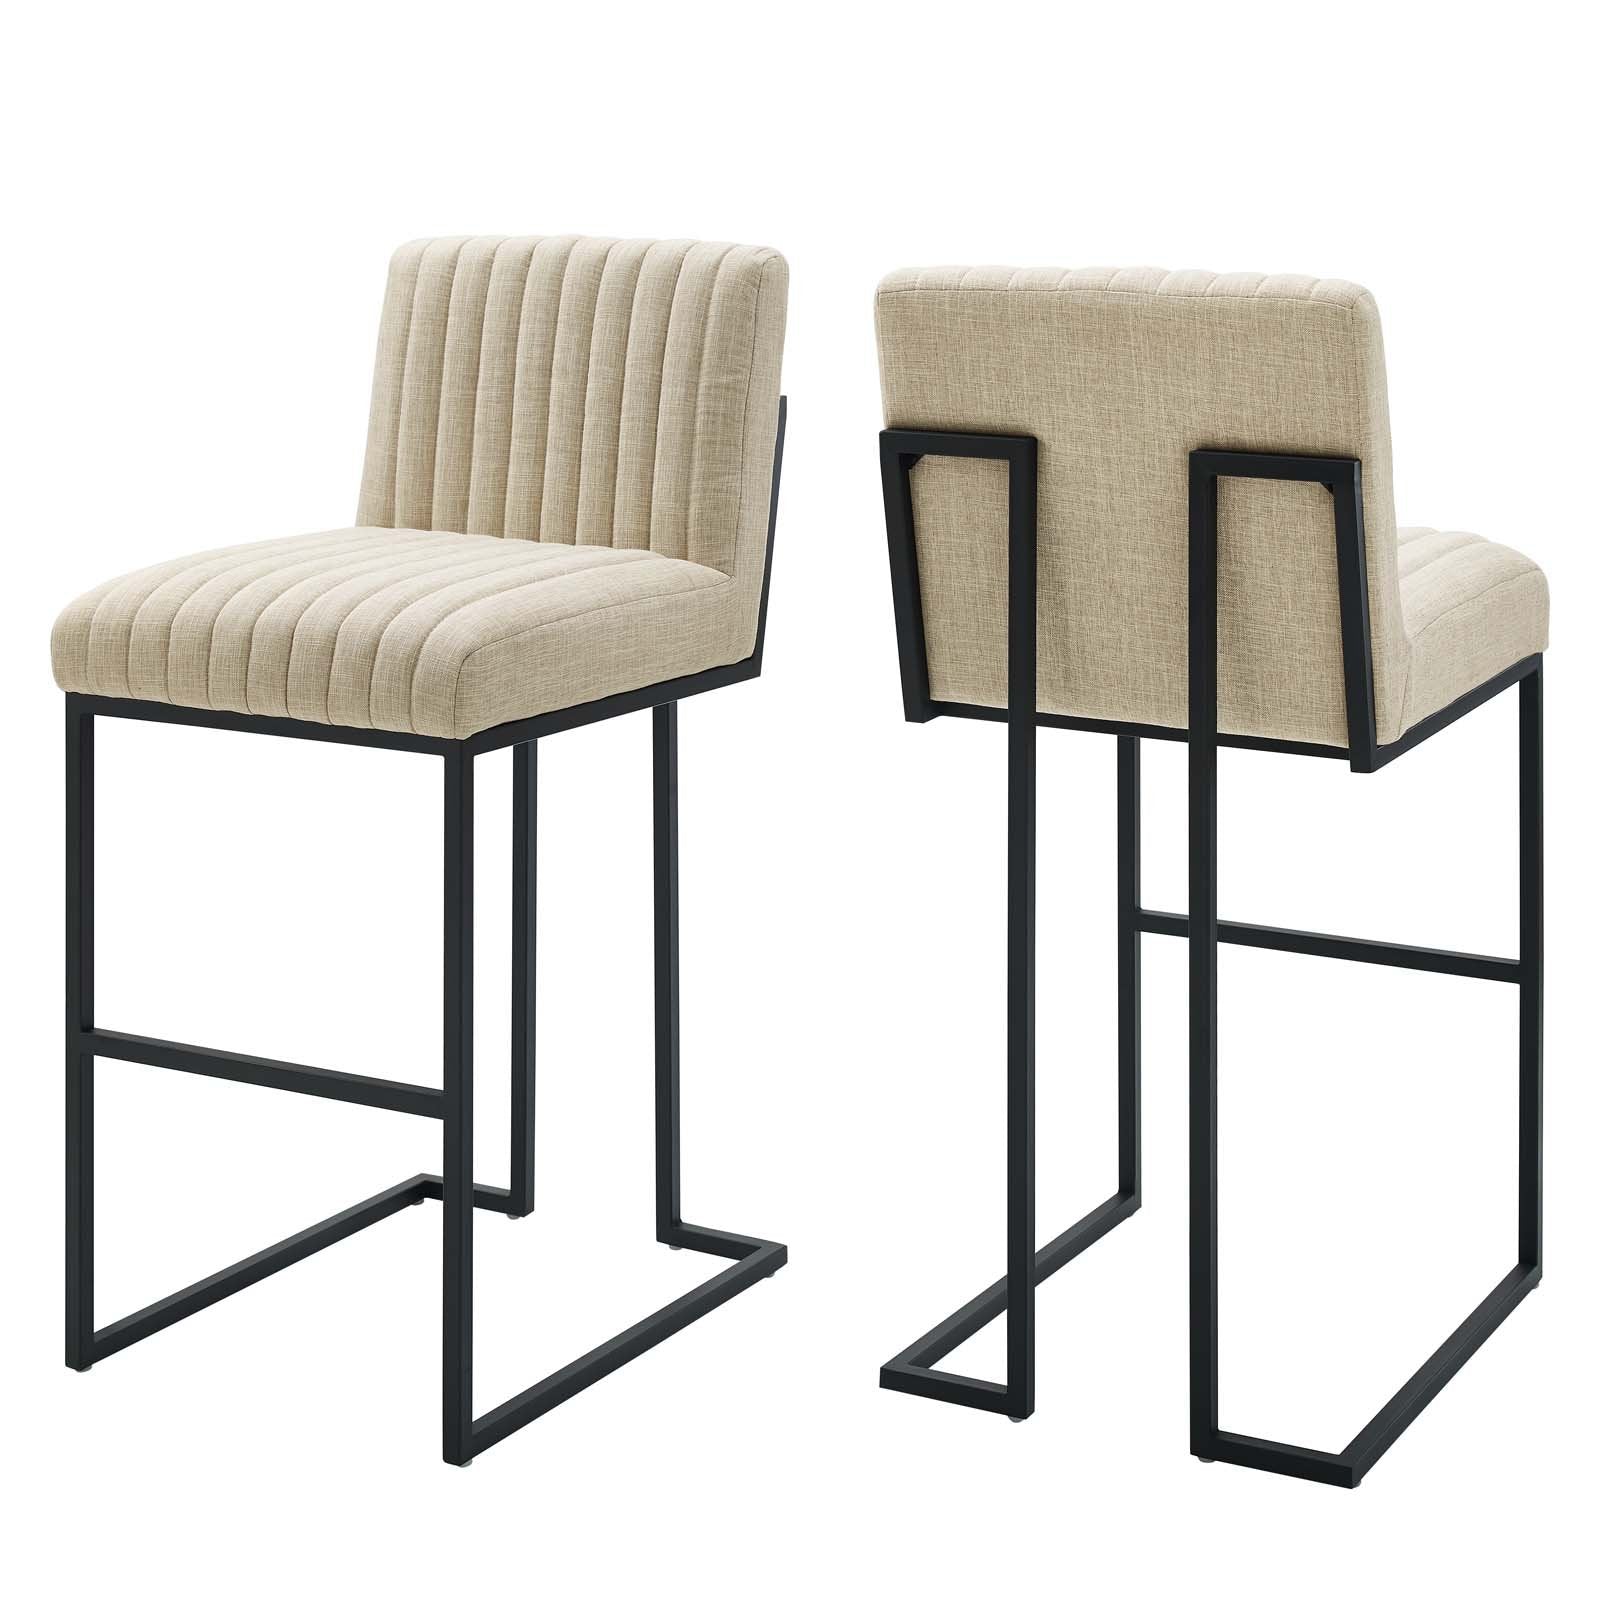 Indulge Channel Tufted Fabric Bar Stools - Set of 2